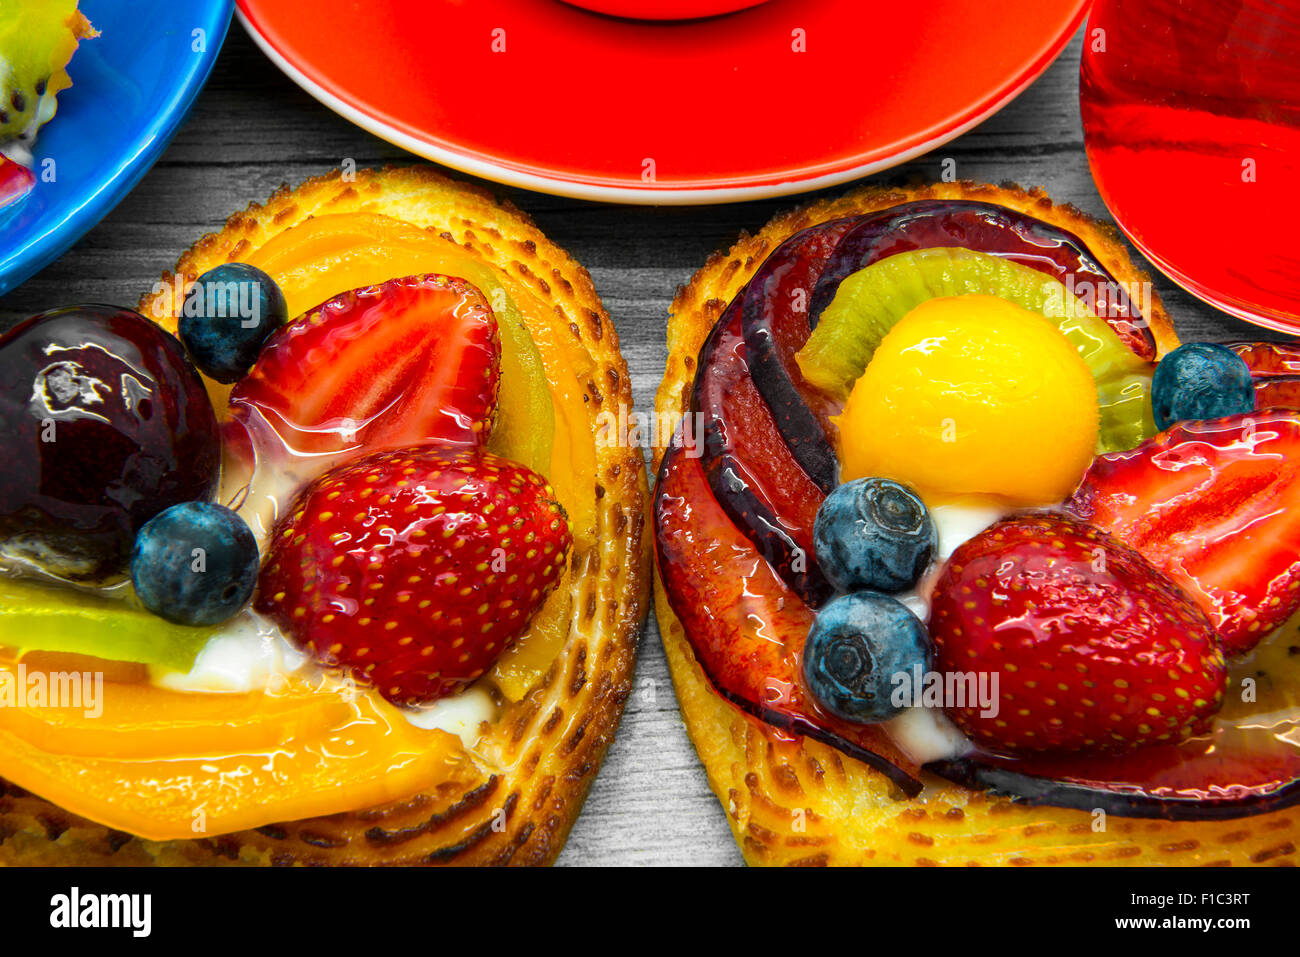 Colorful fruit pies, Desserts with fruits. Stock Photo